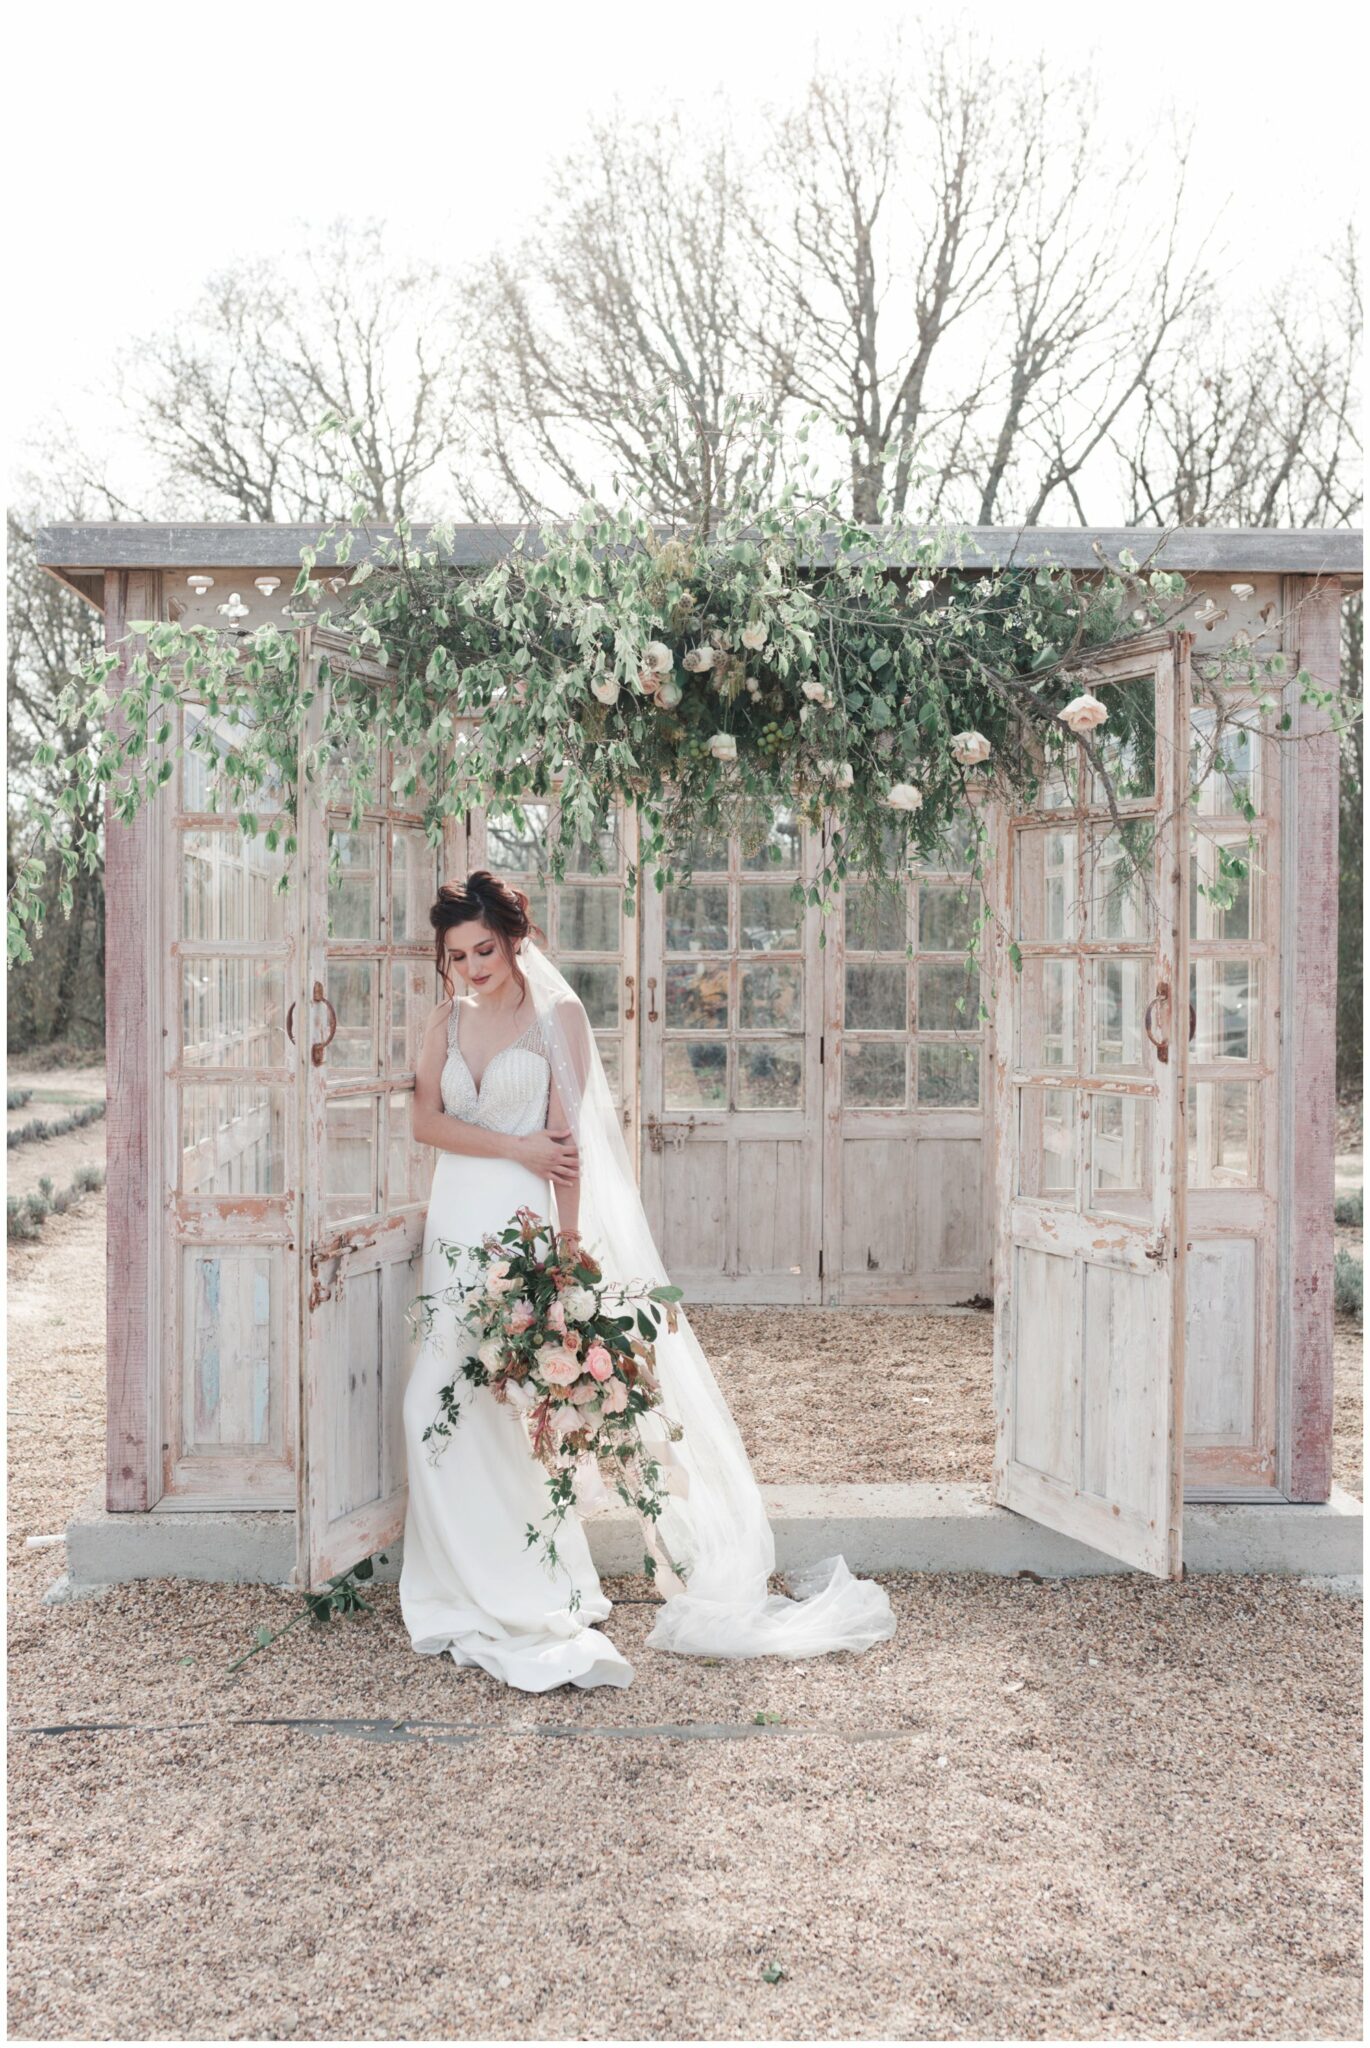 Styled shoots across America